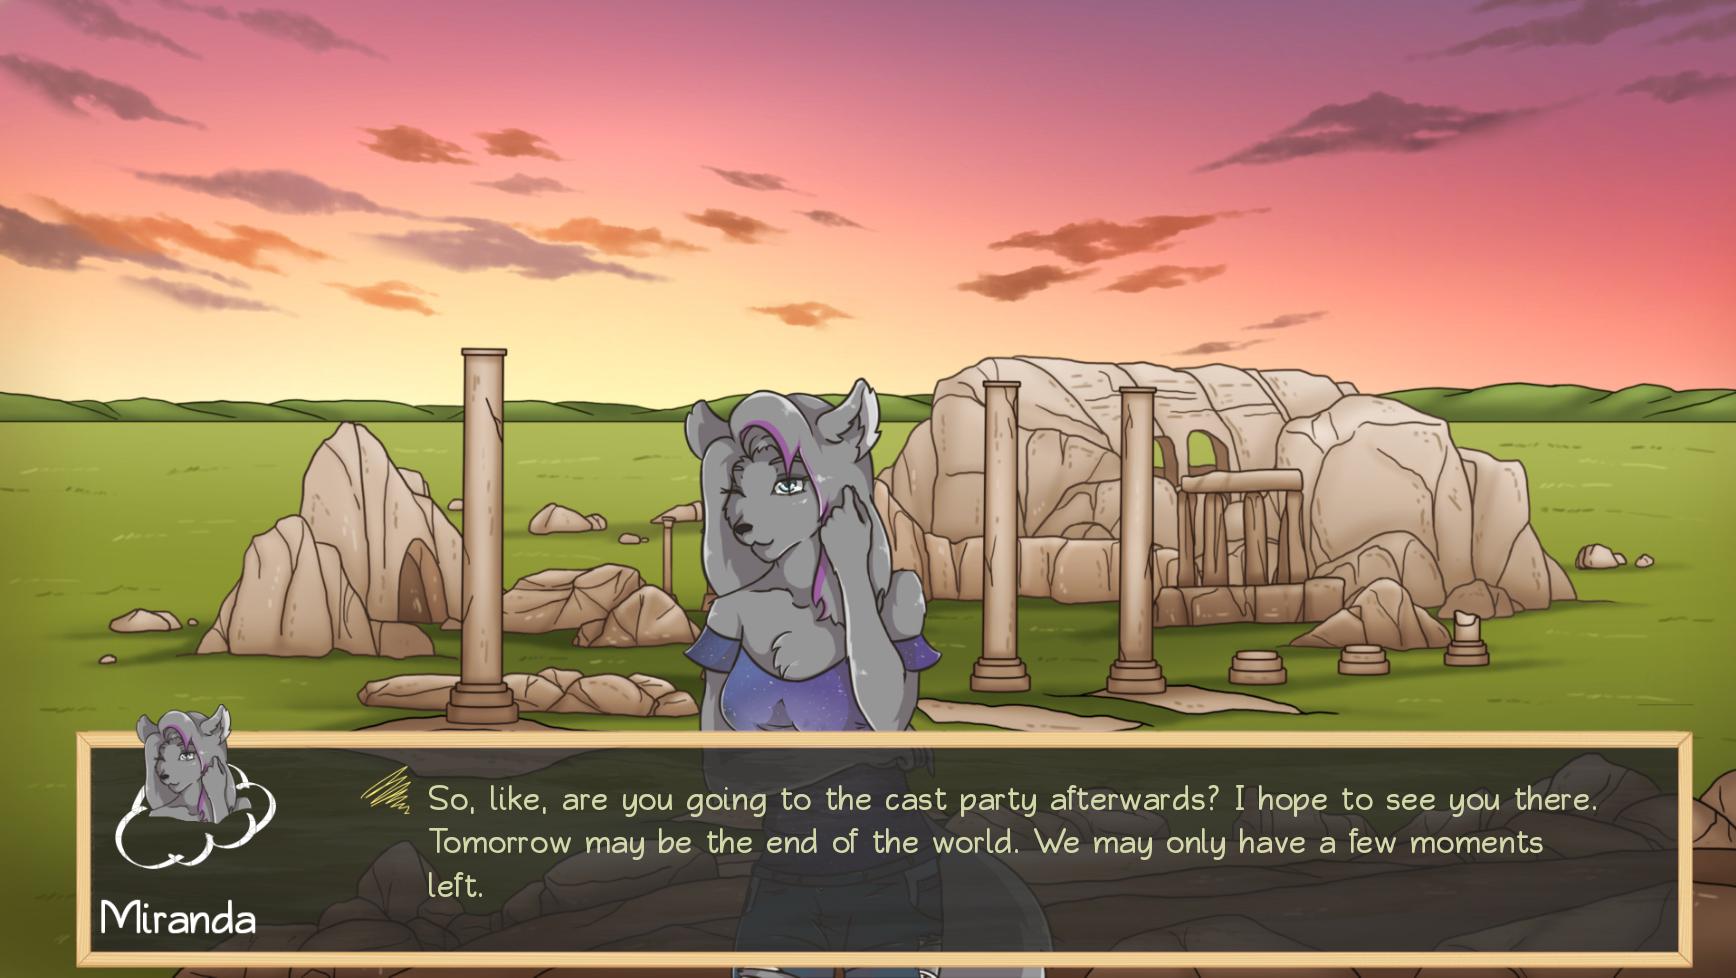 Furry Shakespeare: To Date Or Not To Date Spooky Cat Girls? on Steam